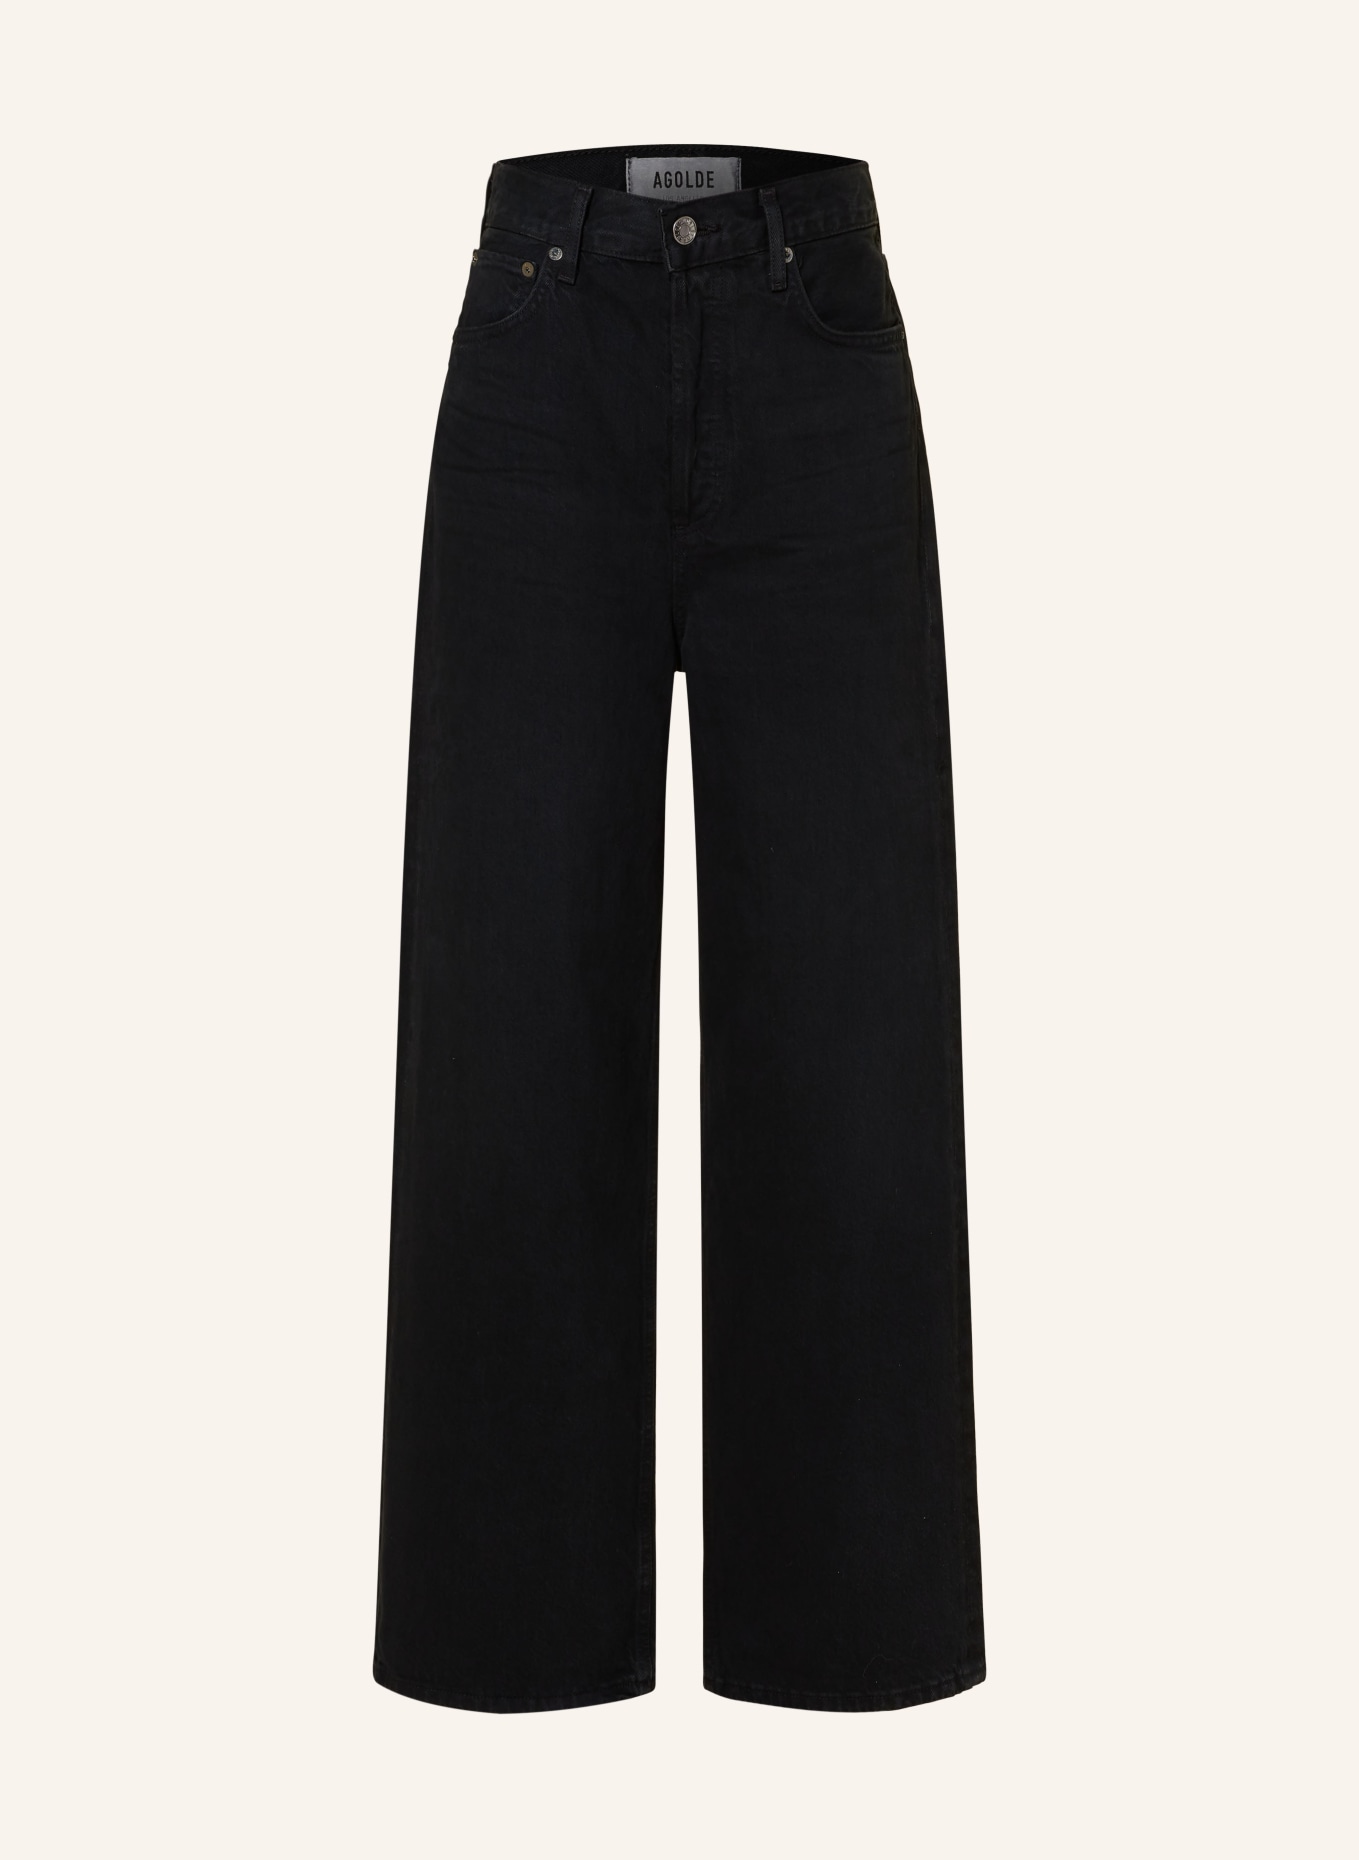 AGOLDE Straight Jeans, Farbe: scowl marble o/d blk (Bild 1)